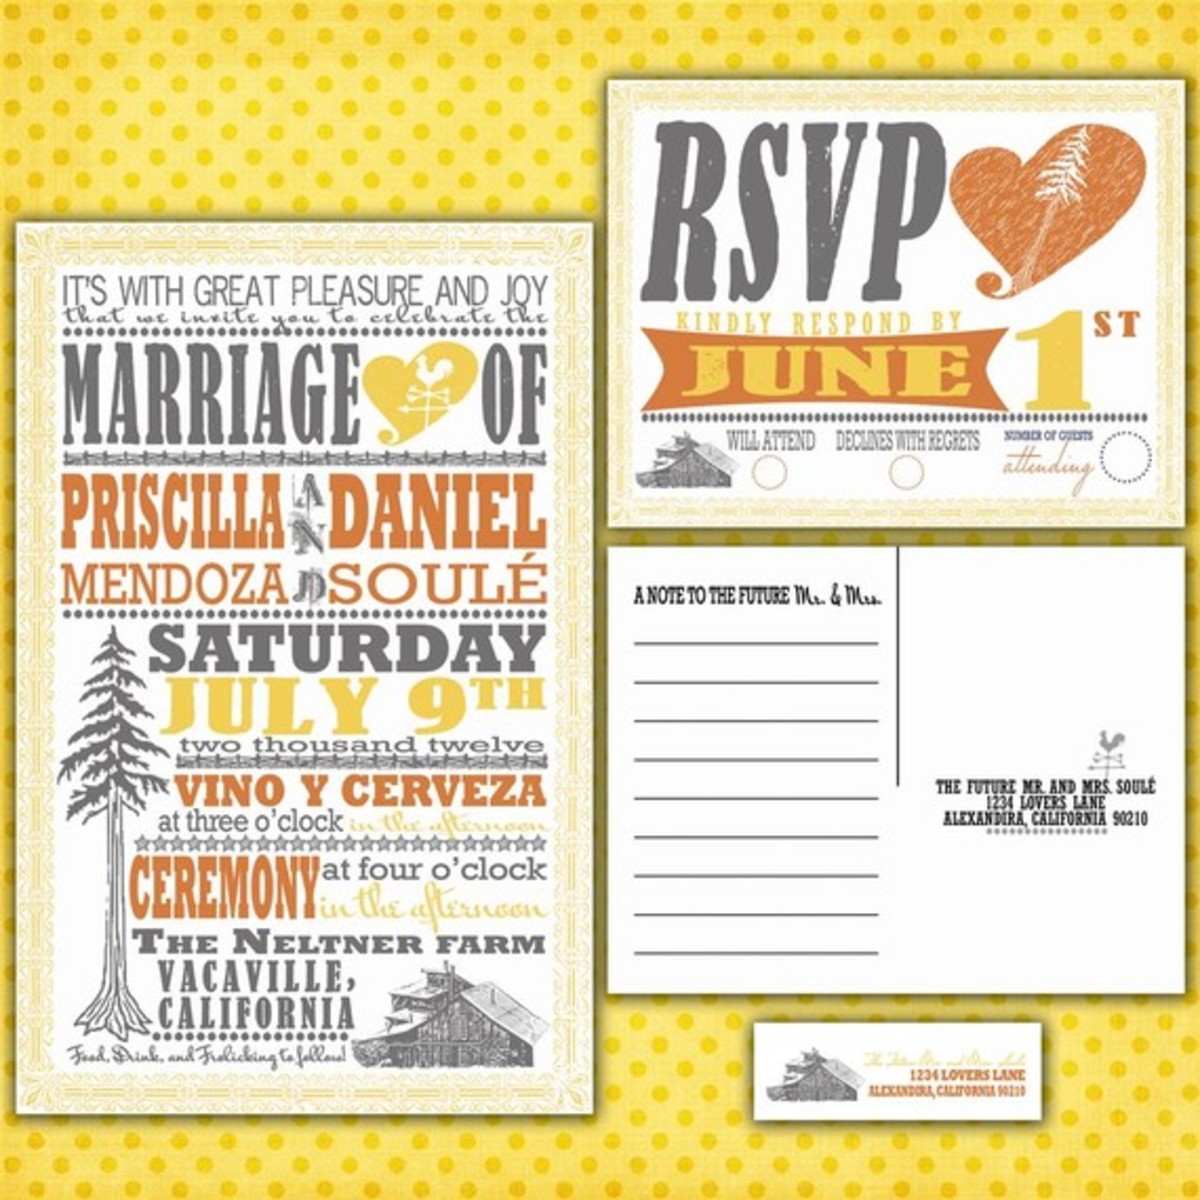 If your venue name doesn't say BARN in it somewhere very prominently, you might want to enclose a separate card letting guests know. 